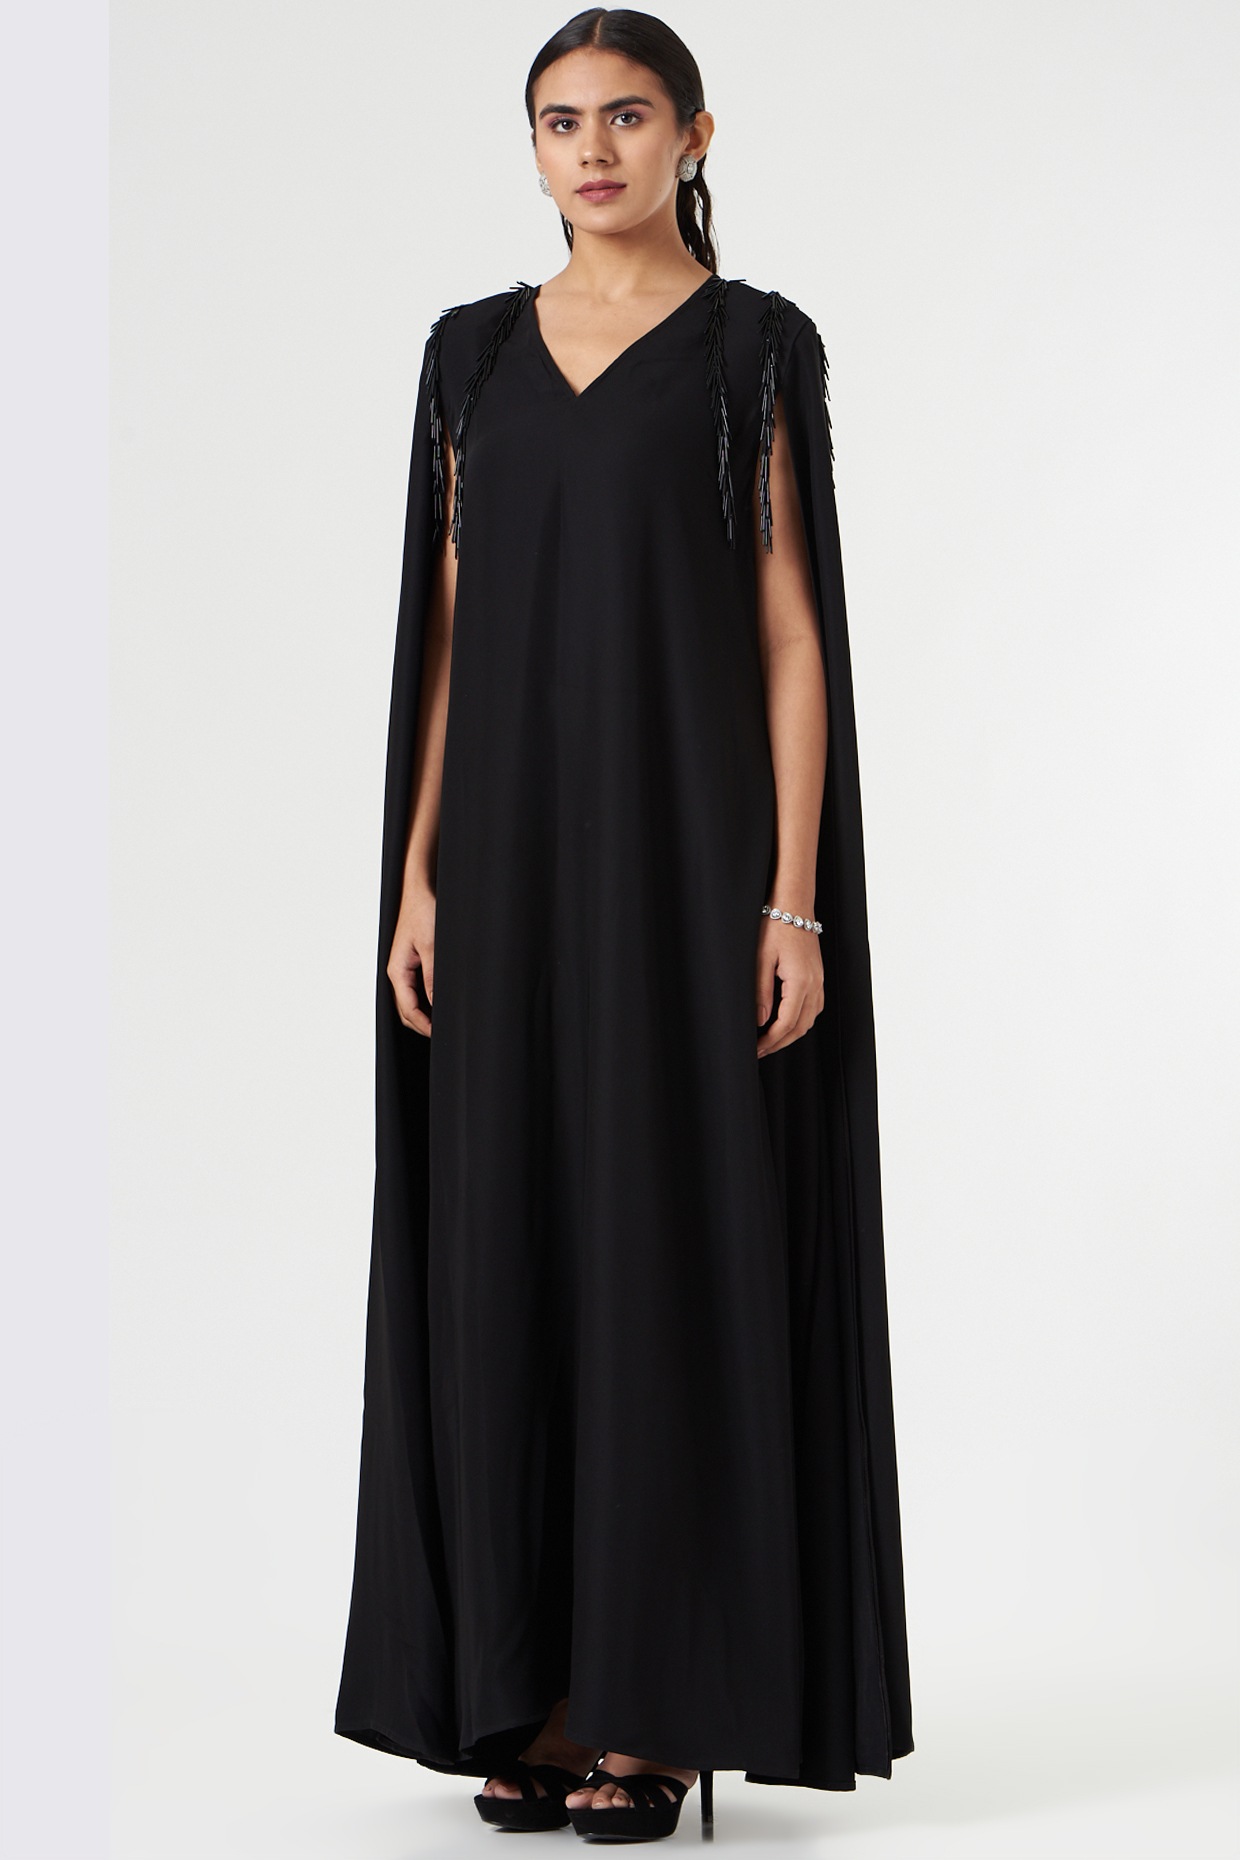 Black cape | Gown party wear, Indian gowns, Gowns dresses